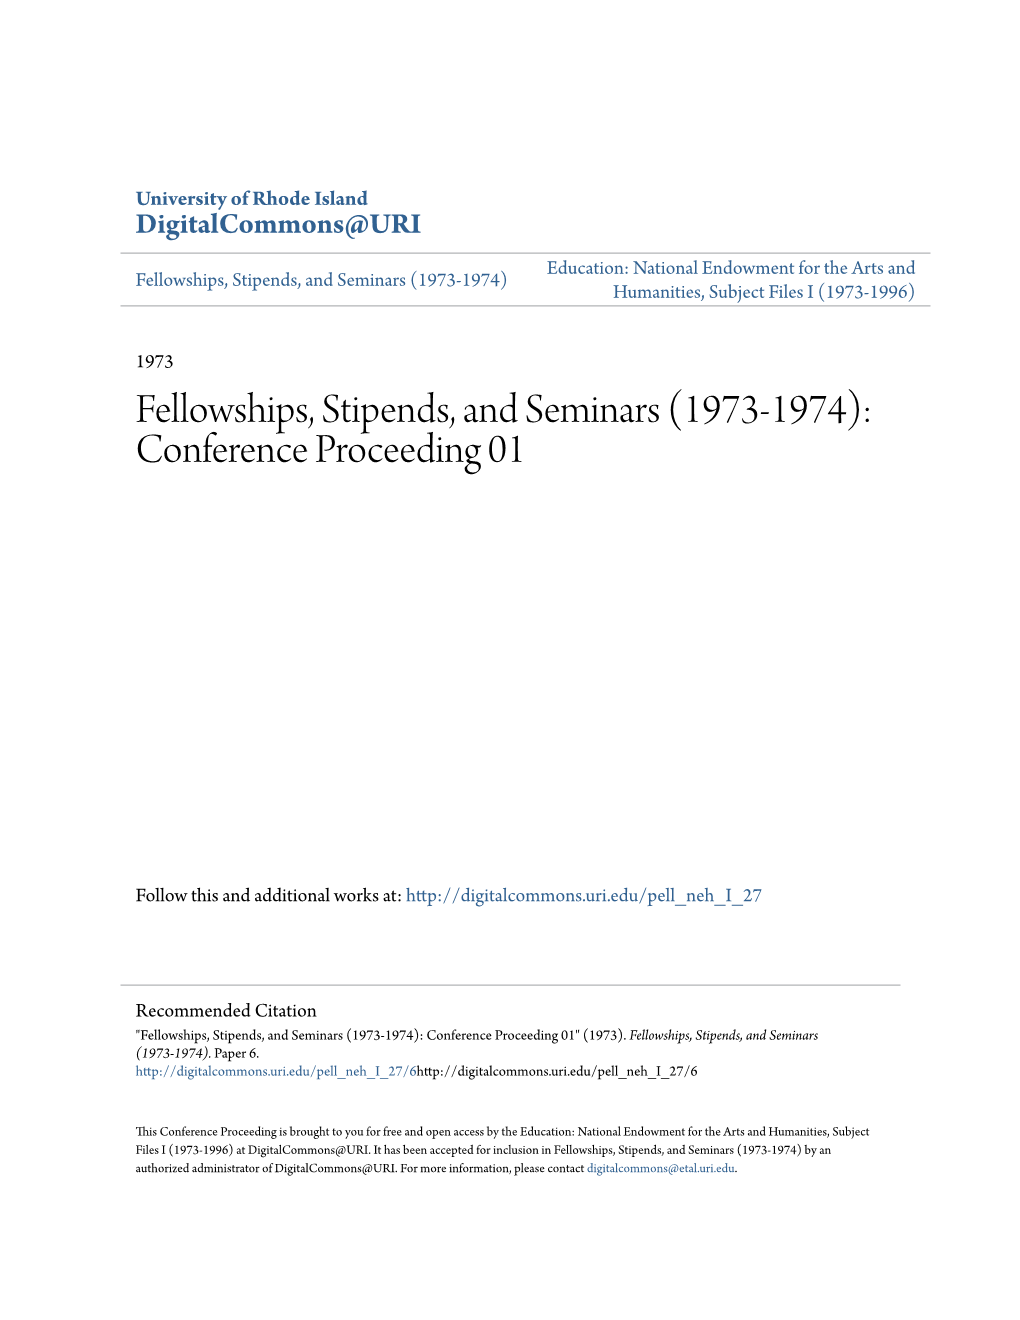 Fellowships, Stipends, and Seminars (1973-1974): Conference Proceeding 01